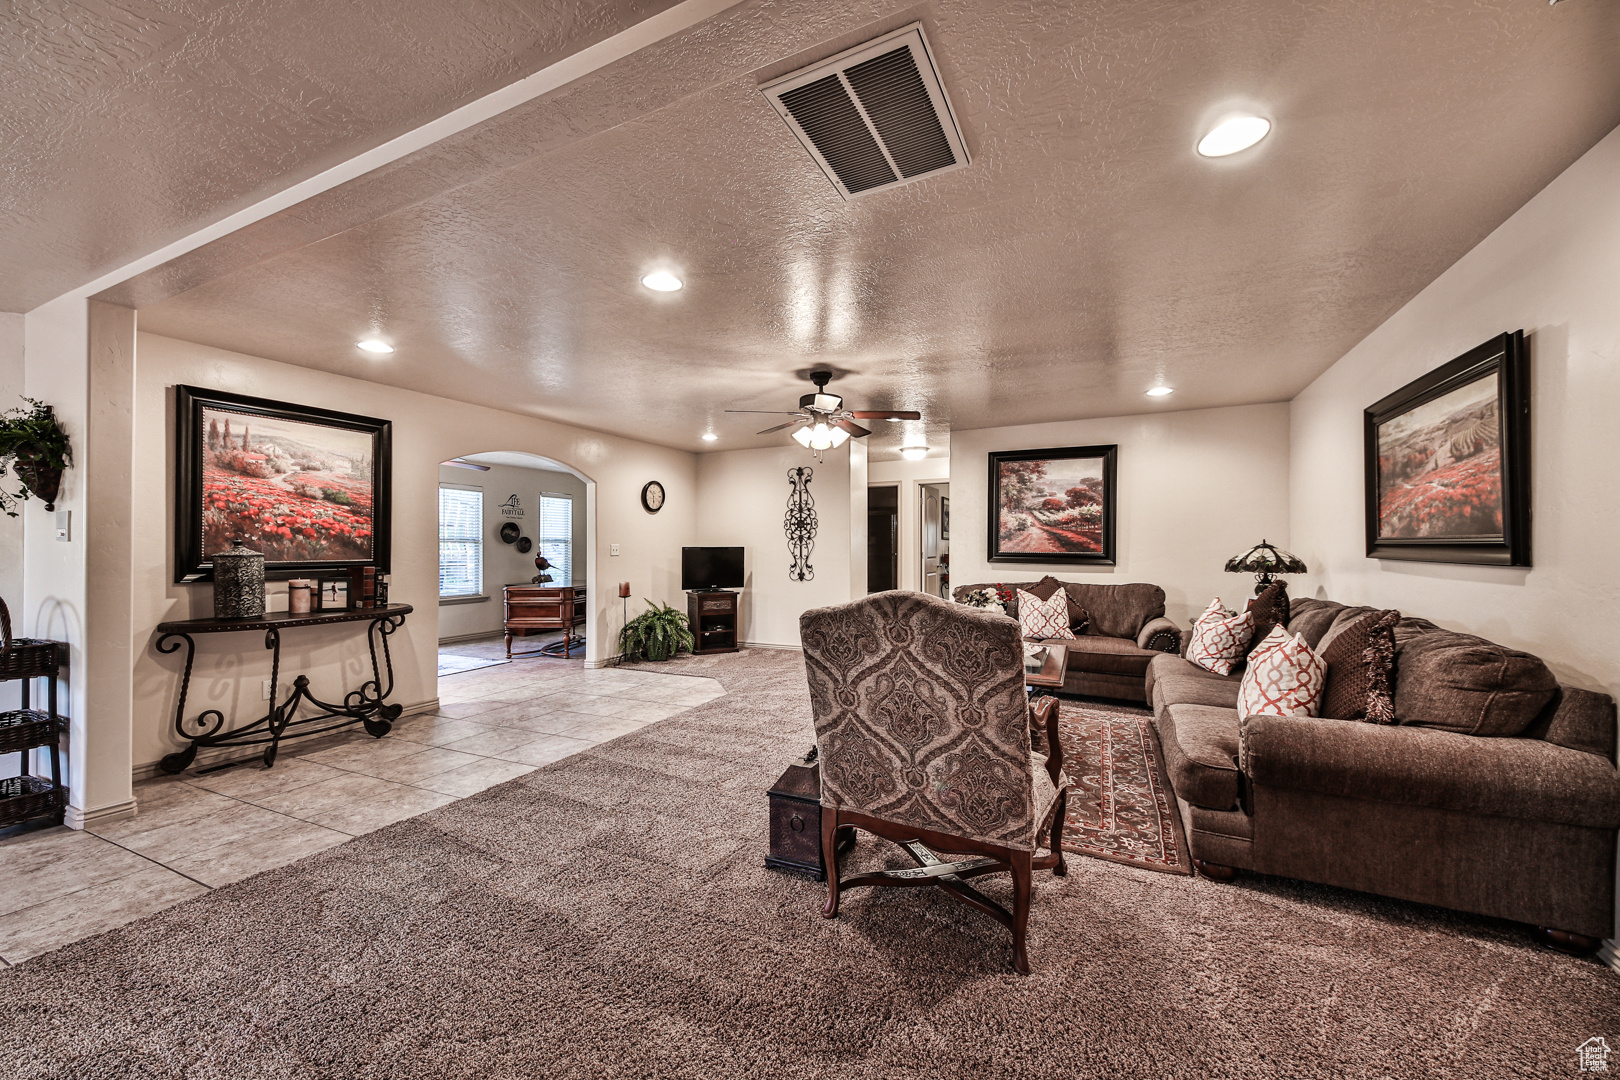 Tiled living room with ceiling fan and a textured ceiling